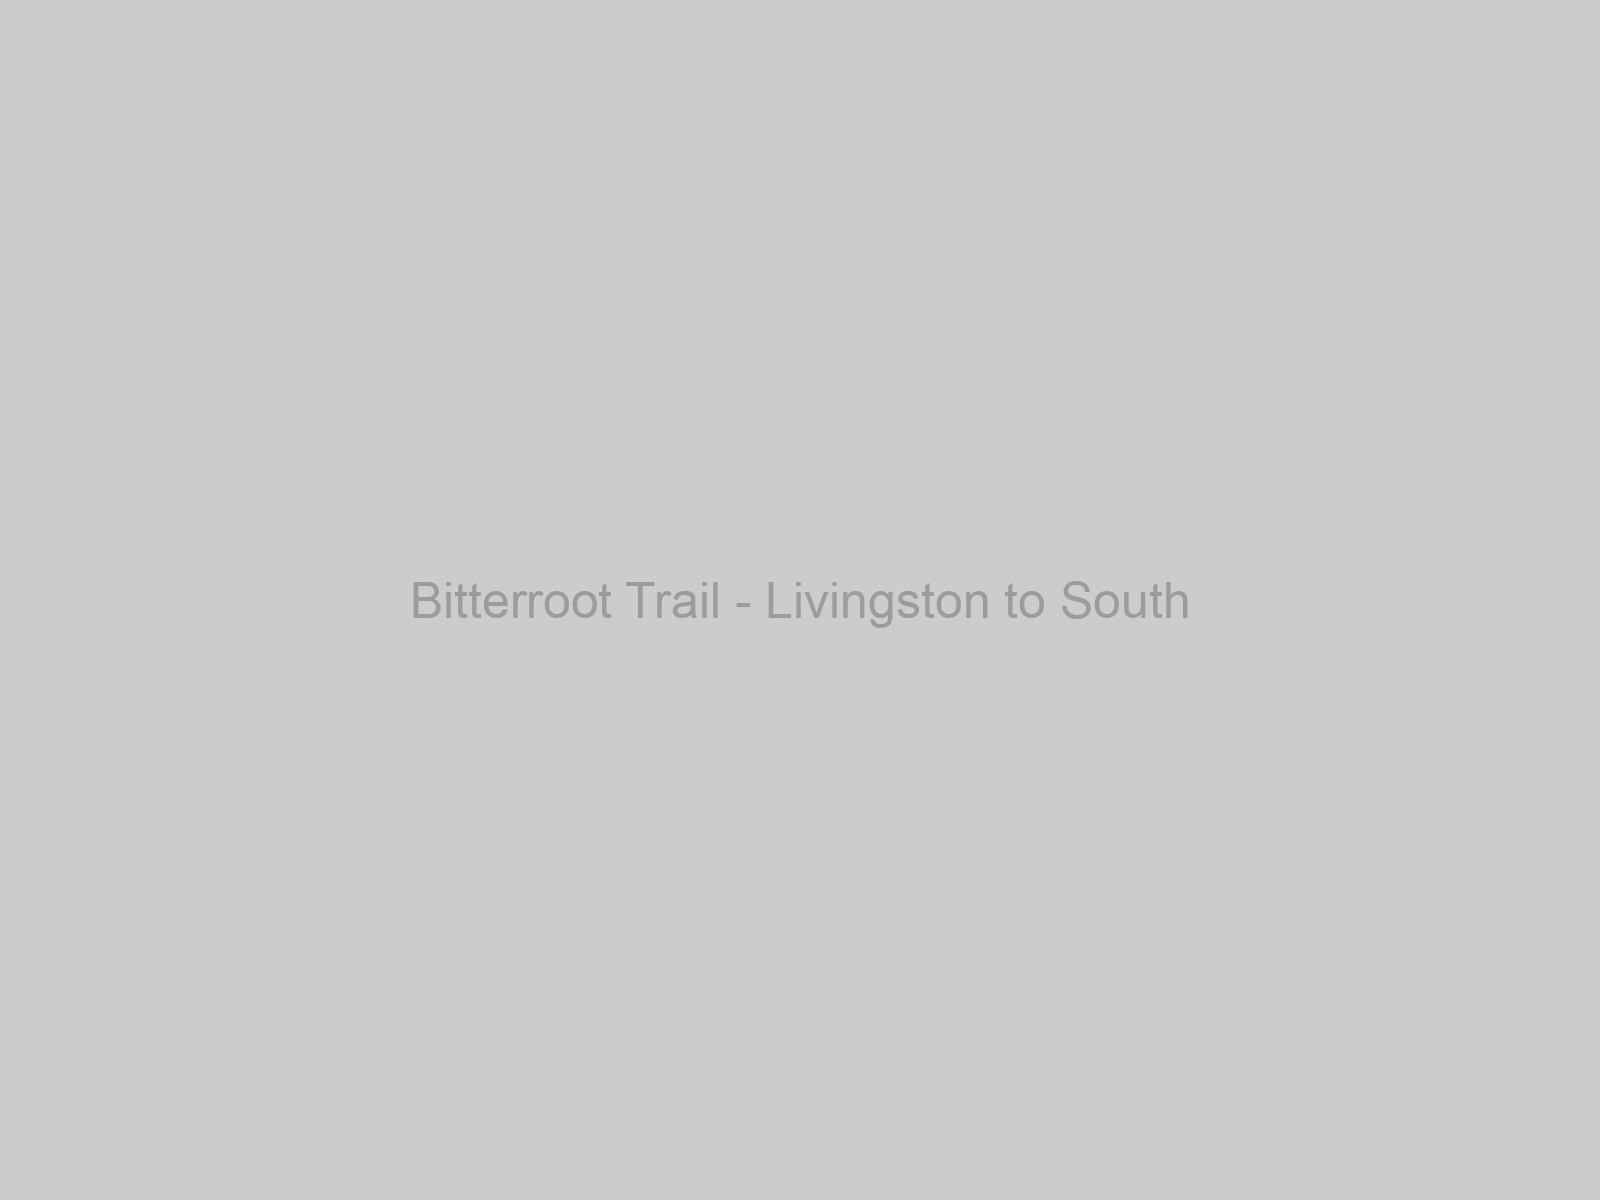 Bitterroot Trail - Livingston to South